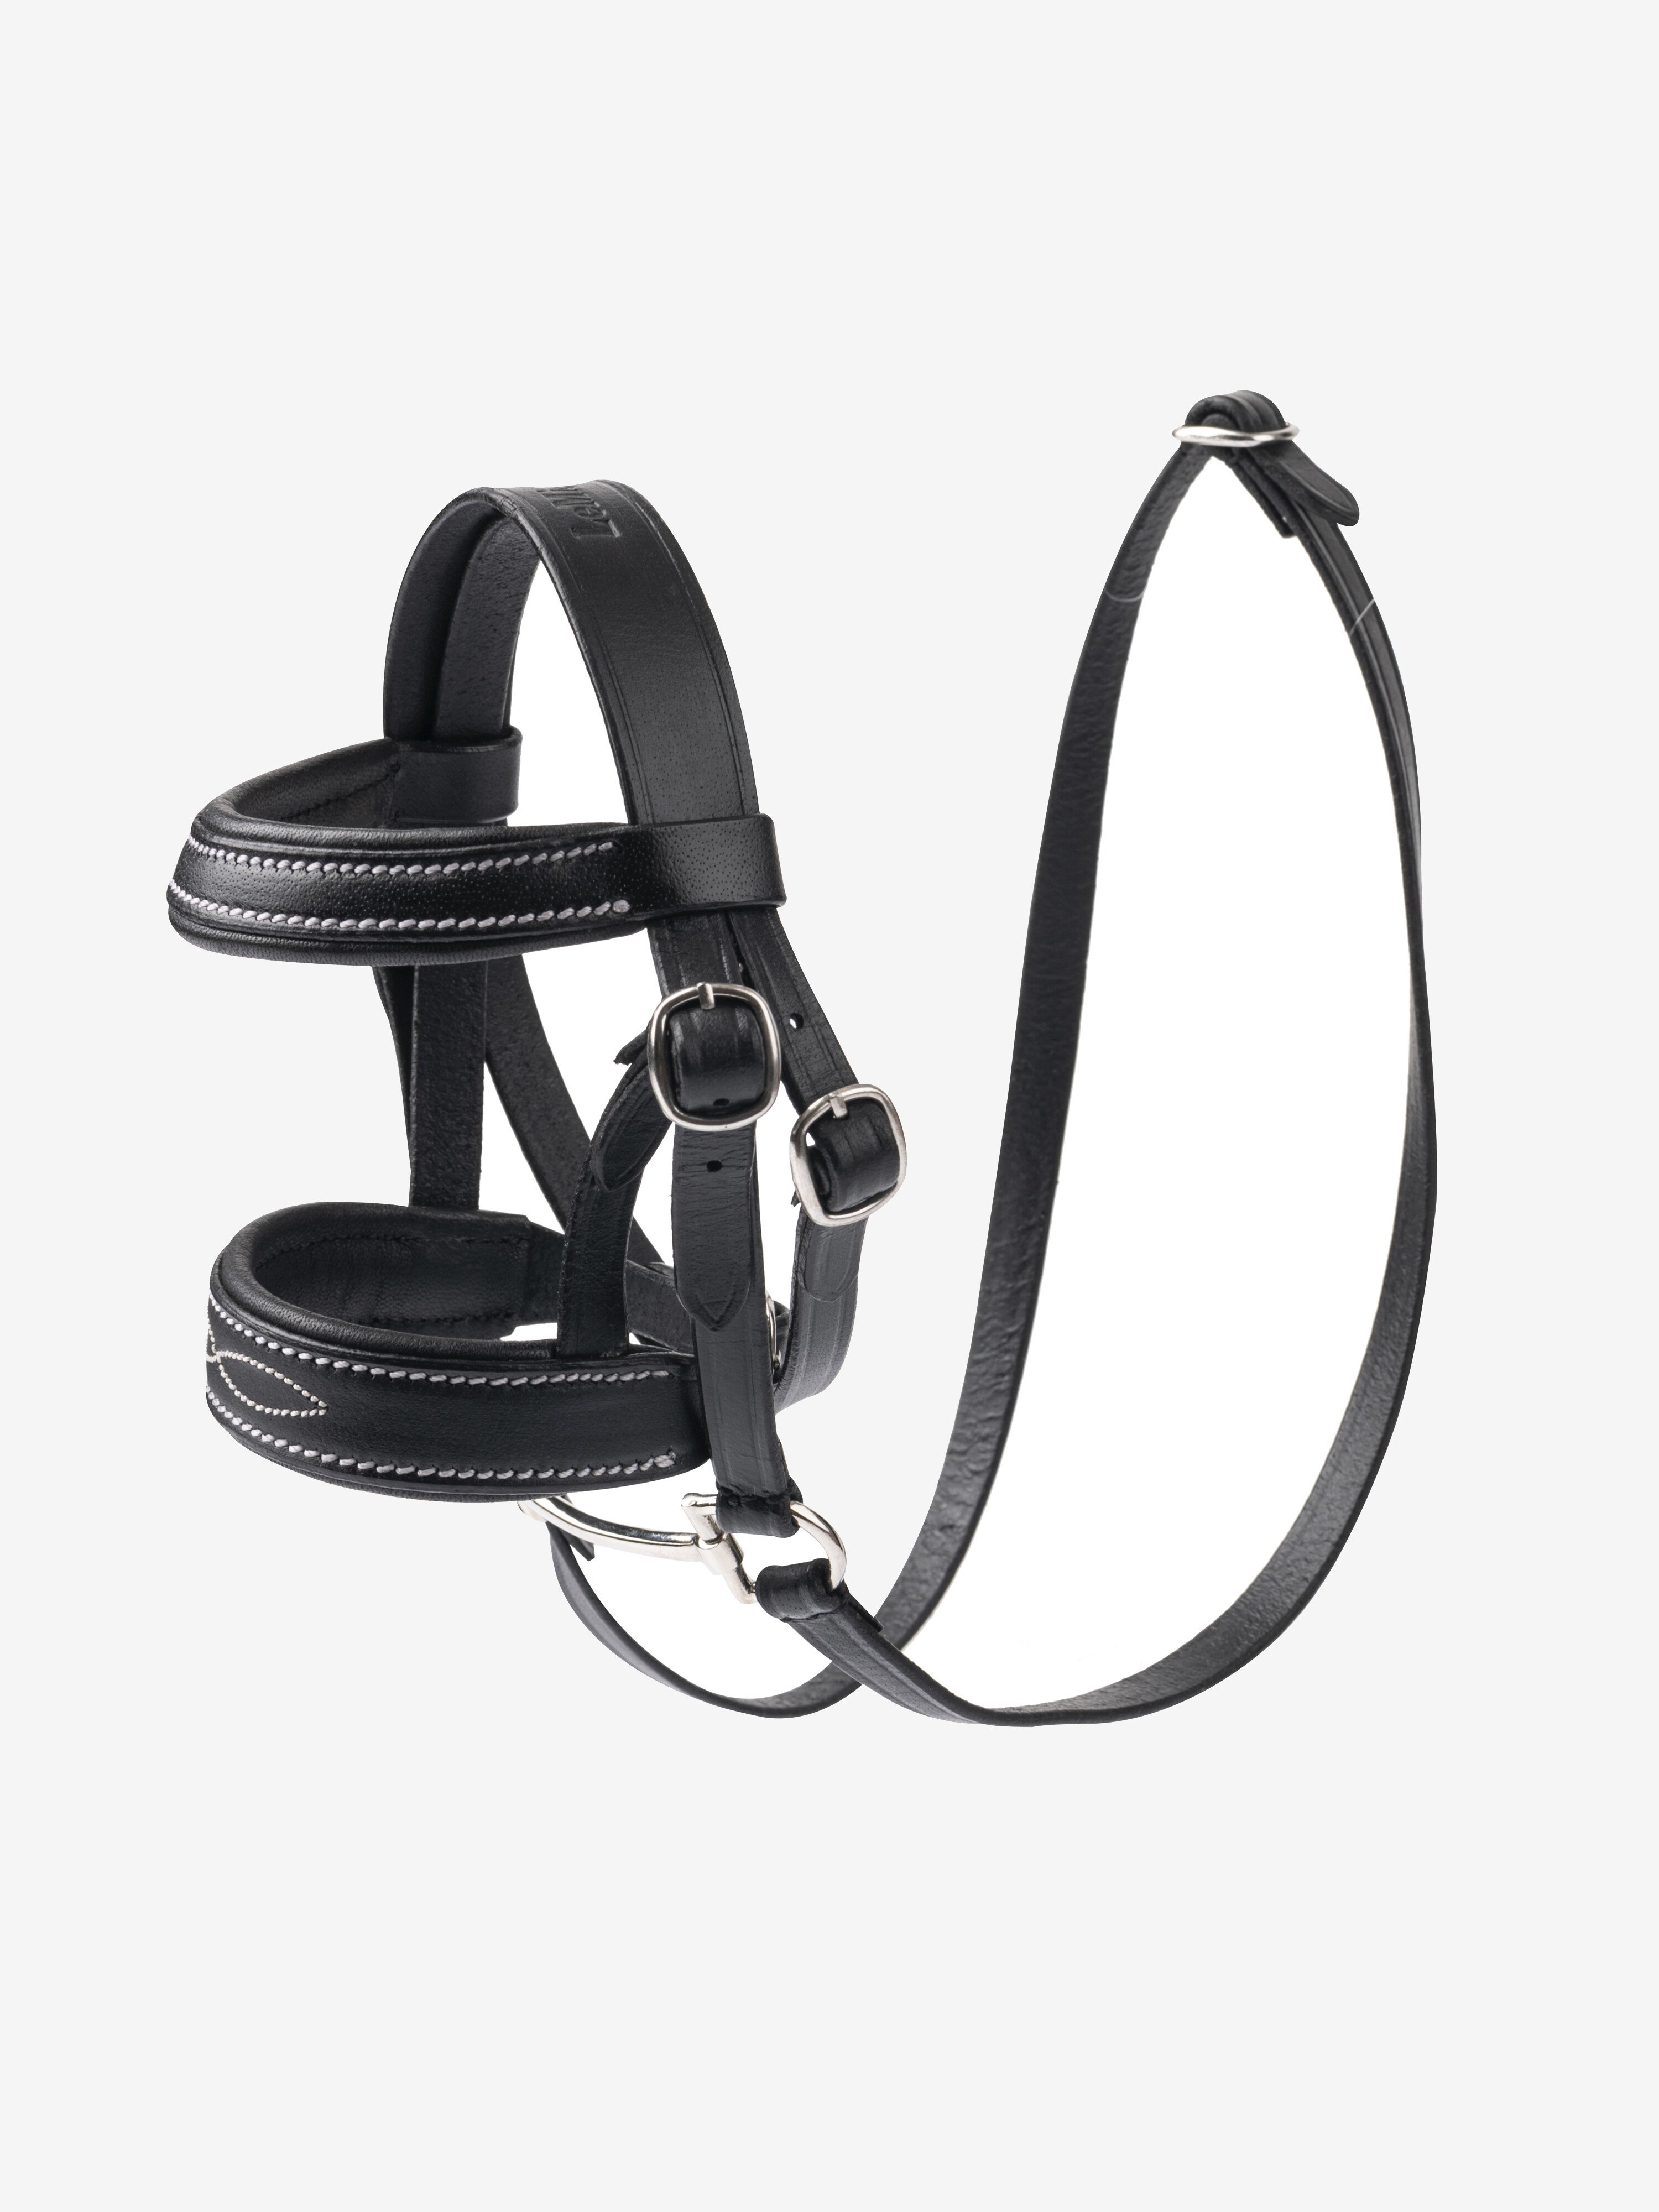 Toy Pony Bridle Black Gifts